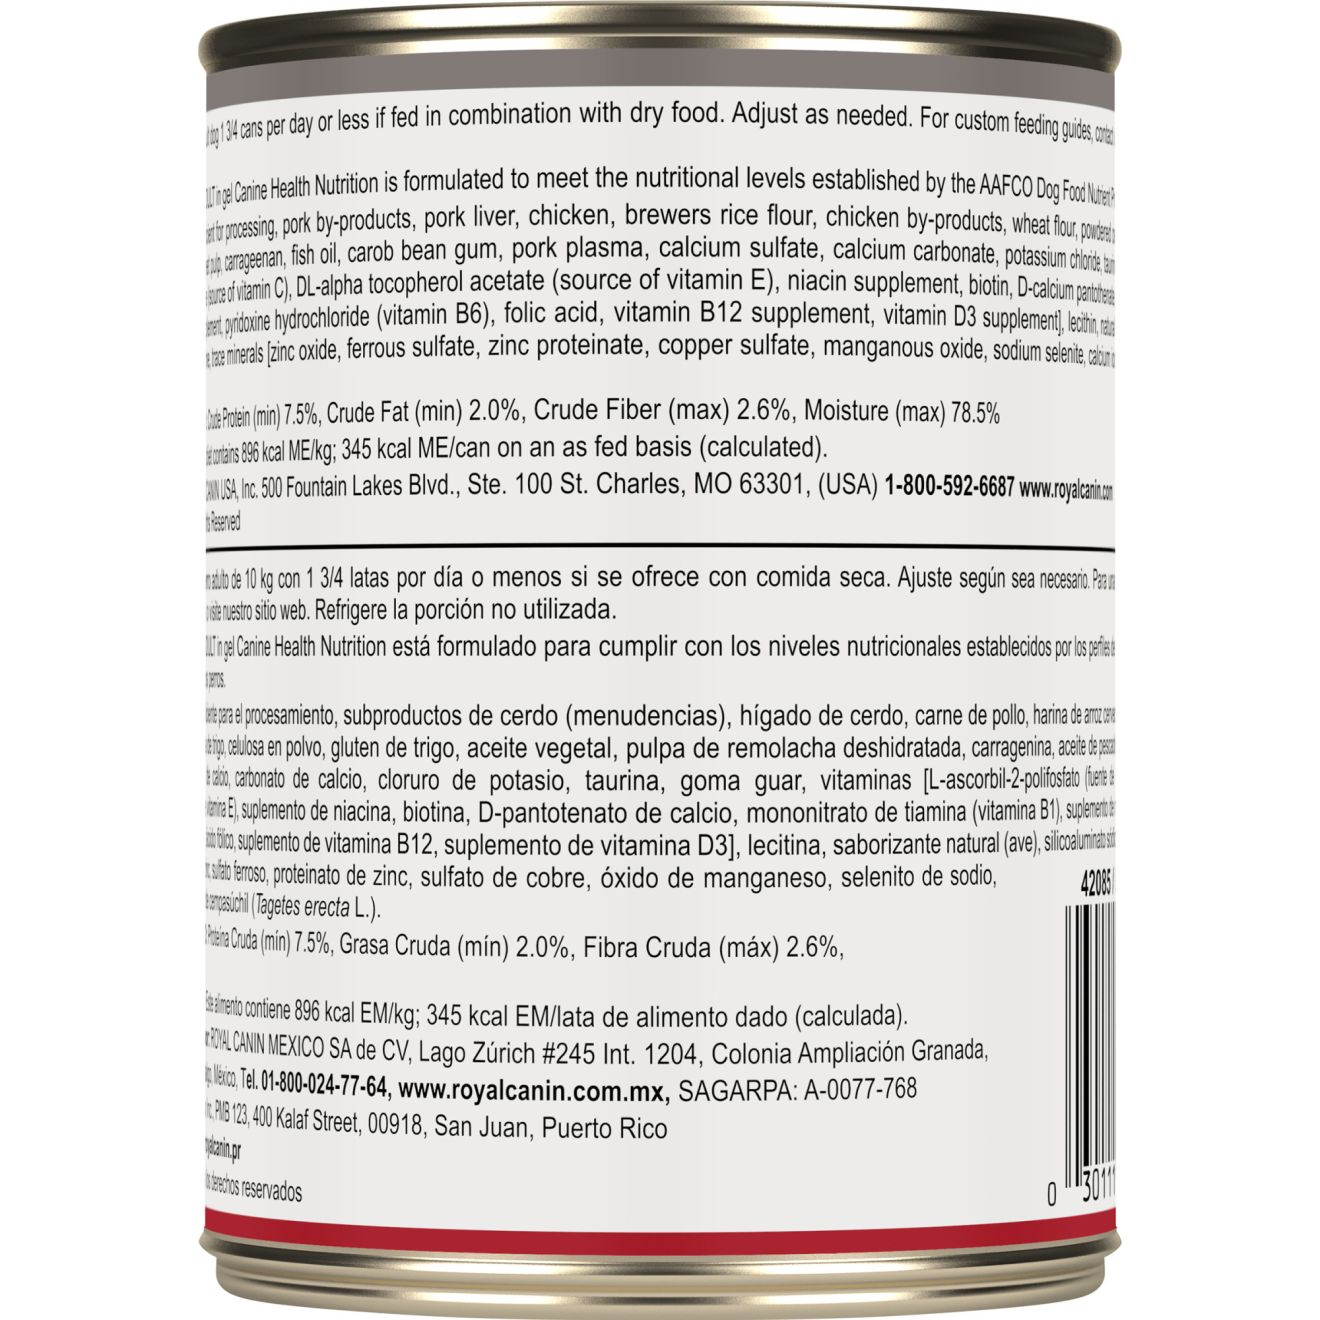 Adult Canned in Gel Dog Food